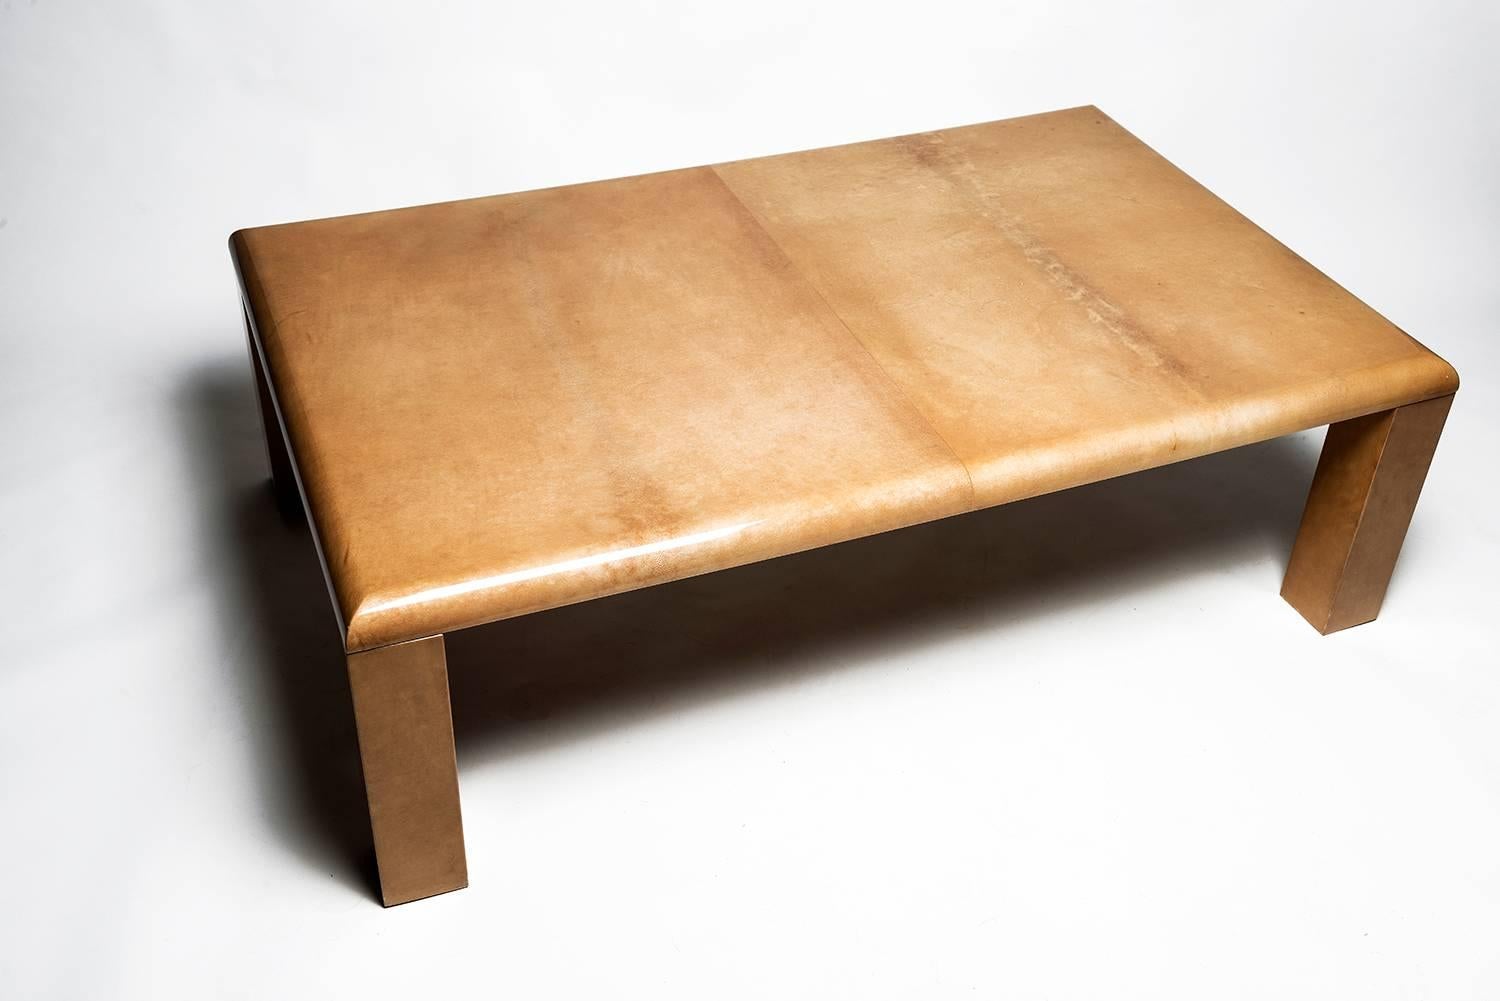 Aldo Tura's signature combination of rich materials and artisanal mastery is elegantly expressed in this fine coffee table. Lacquered goatskin covers the clean lines of the wooden base. 
Mid-Century Italian glamour in excellent condition. Labelled.